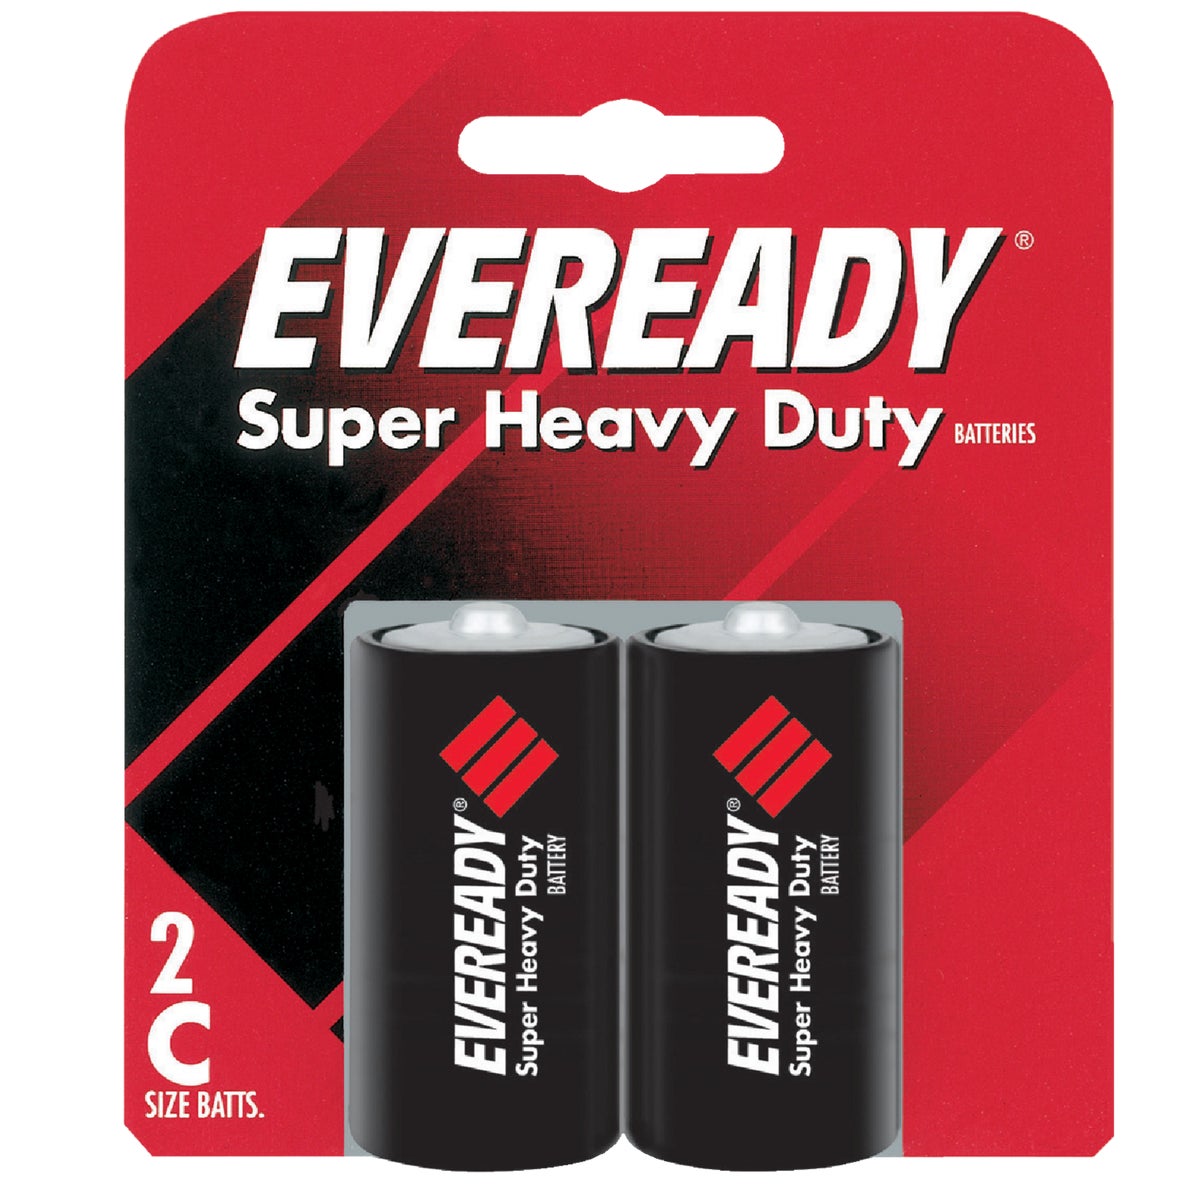 Item 822131, Eveready Super Heavy Duty is the affordable carbon zinc solution that 